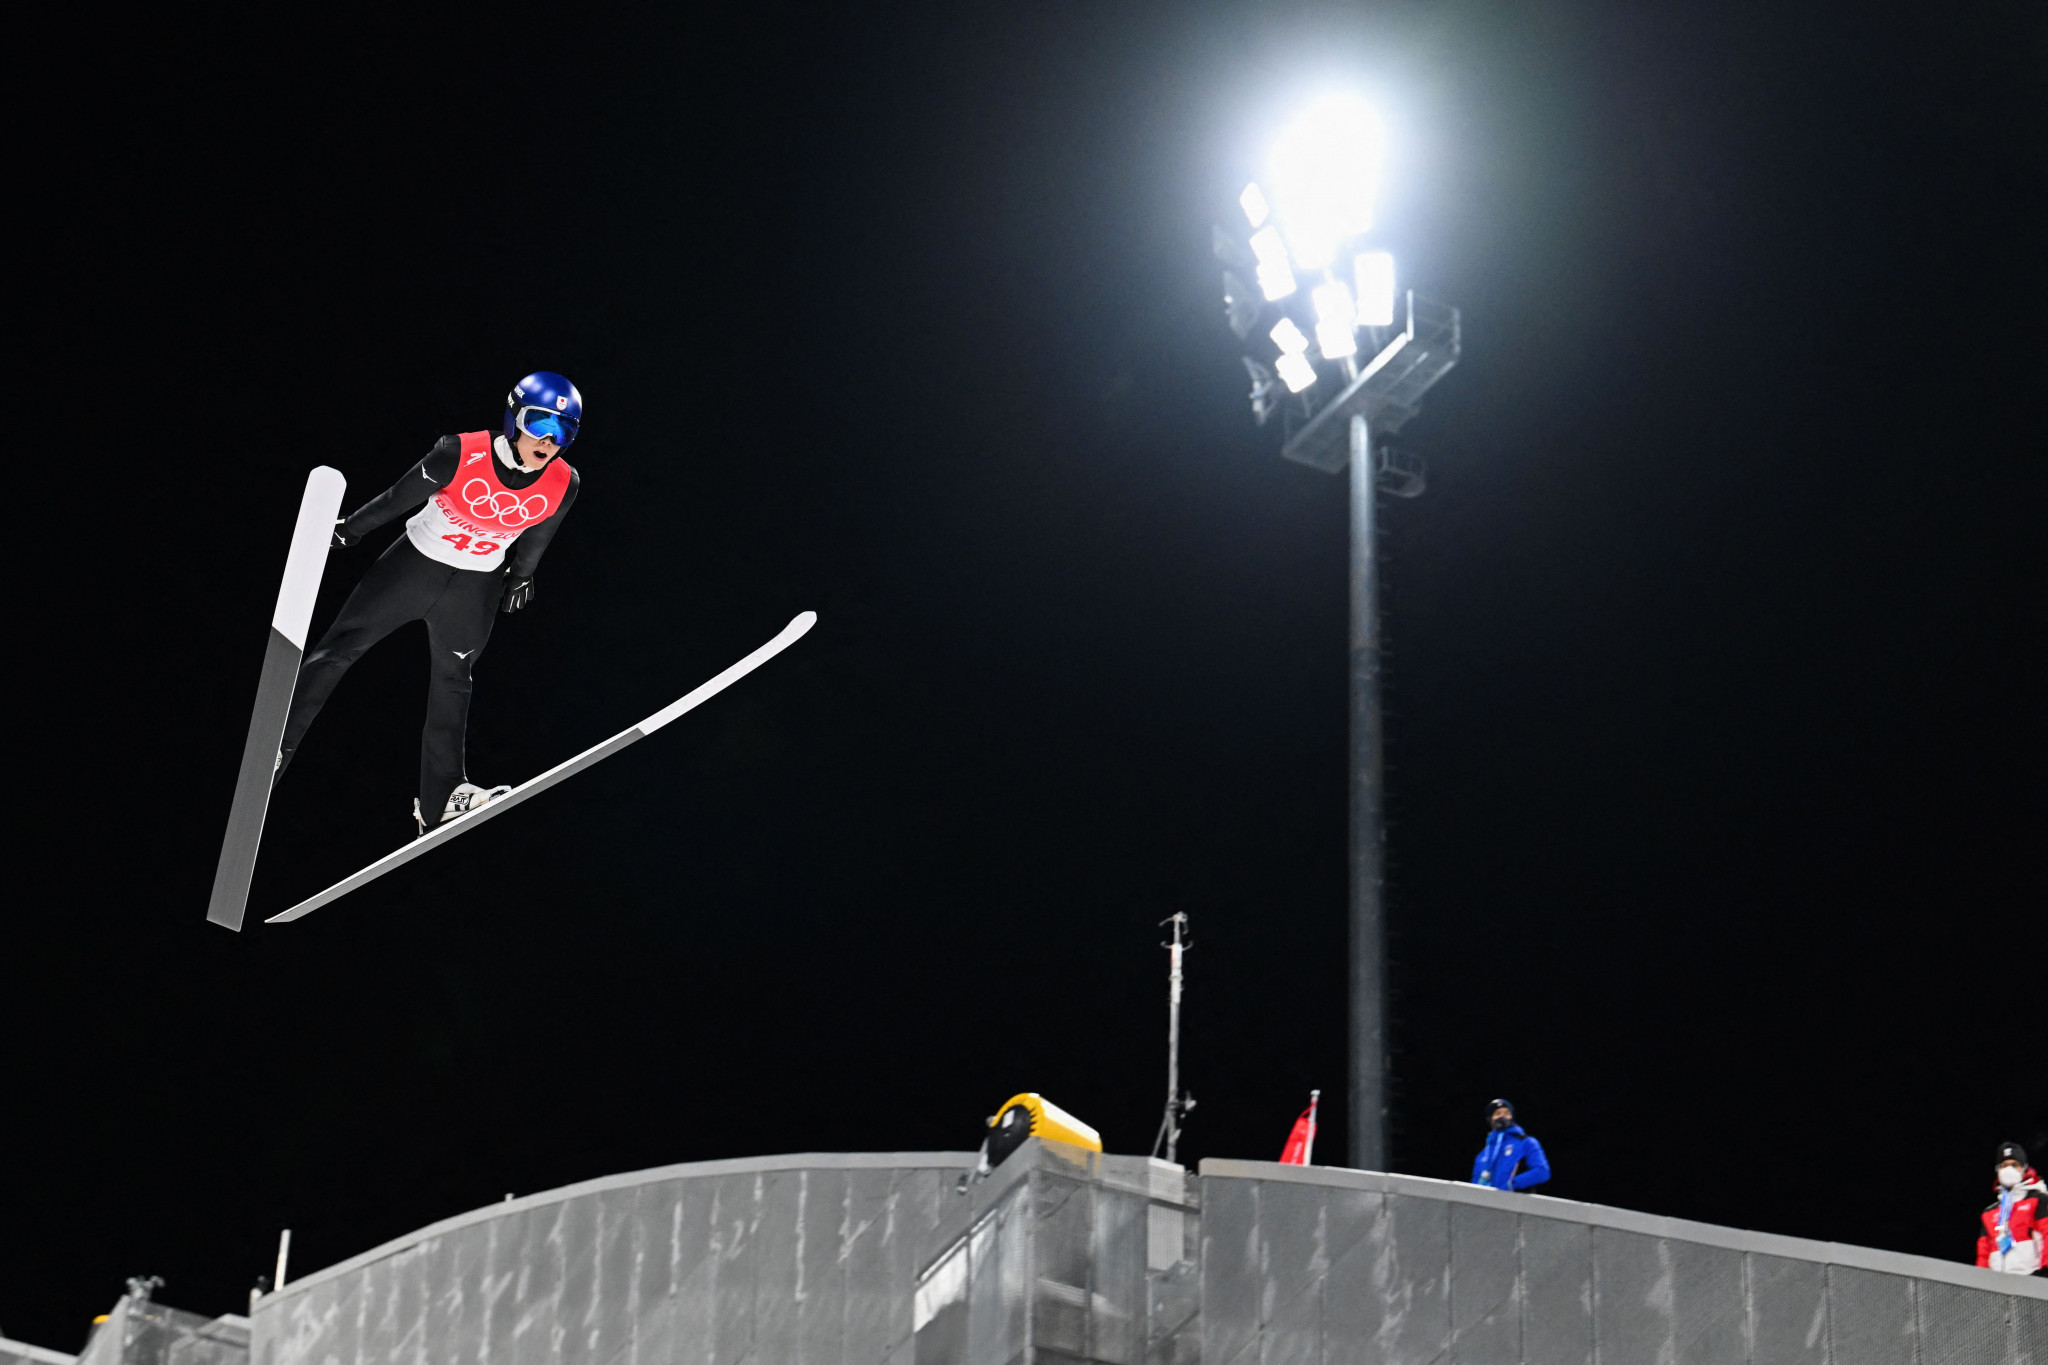 Ryōyū Kobayashi won the men's normal hill gold medal for Japan's first Olympic ski jumping triumph in 24 years ©Getty Images